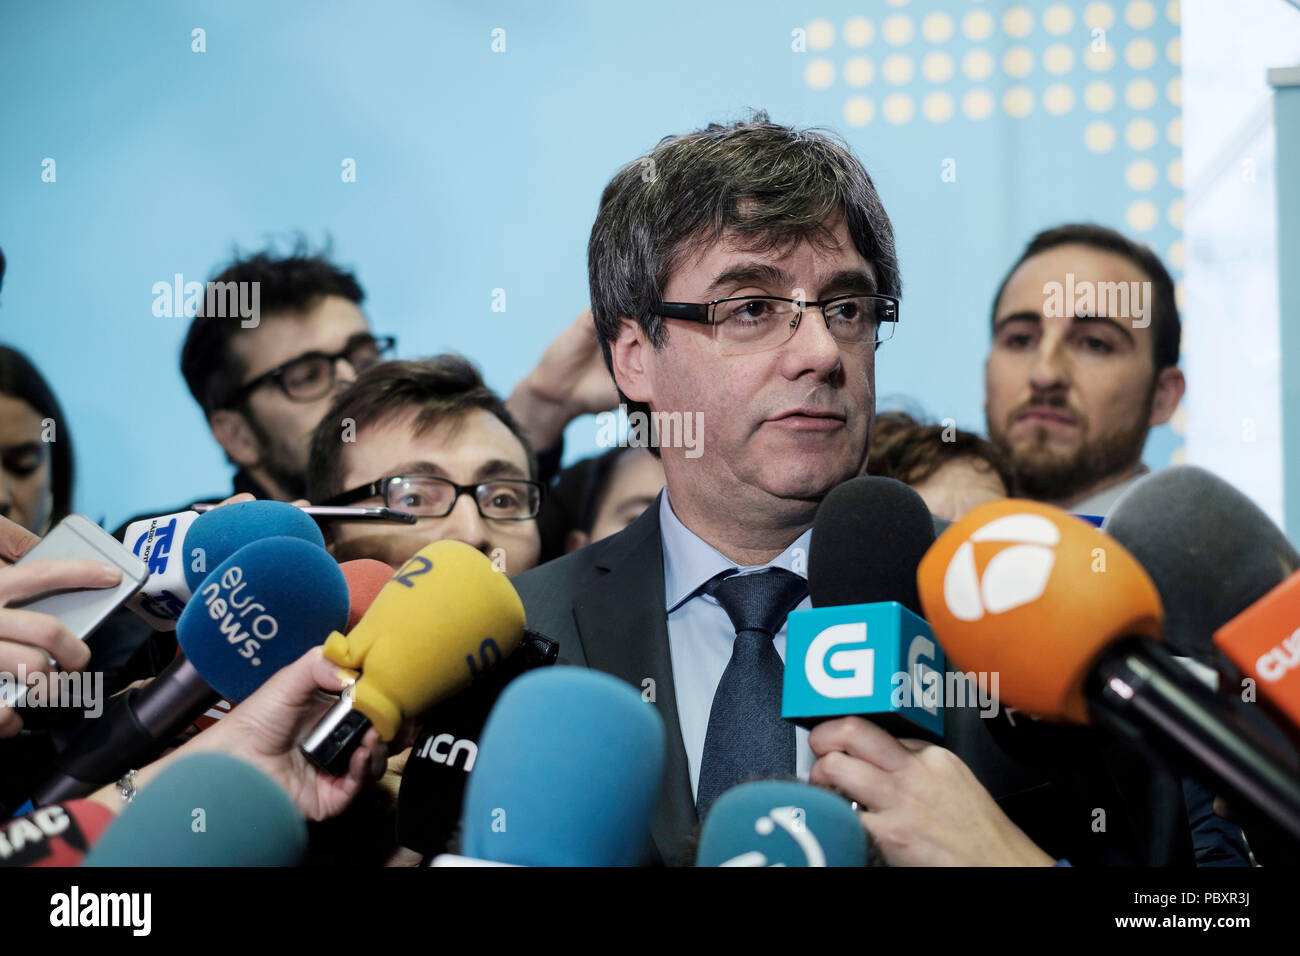 Belgium, Brussels, on 2018/01/24: Carles Puigdemont, former President of the Generalitat of Catalonia Stock Photo